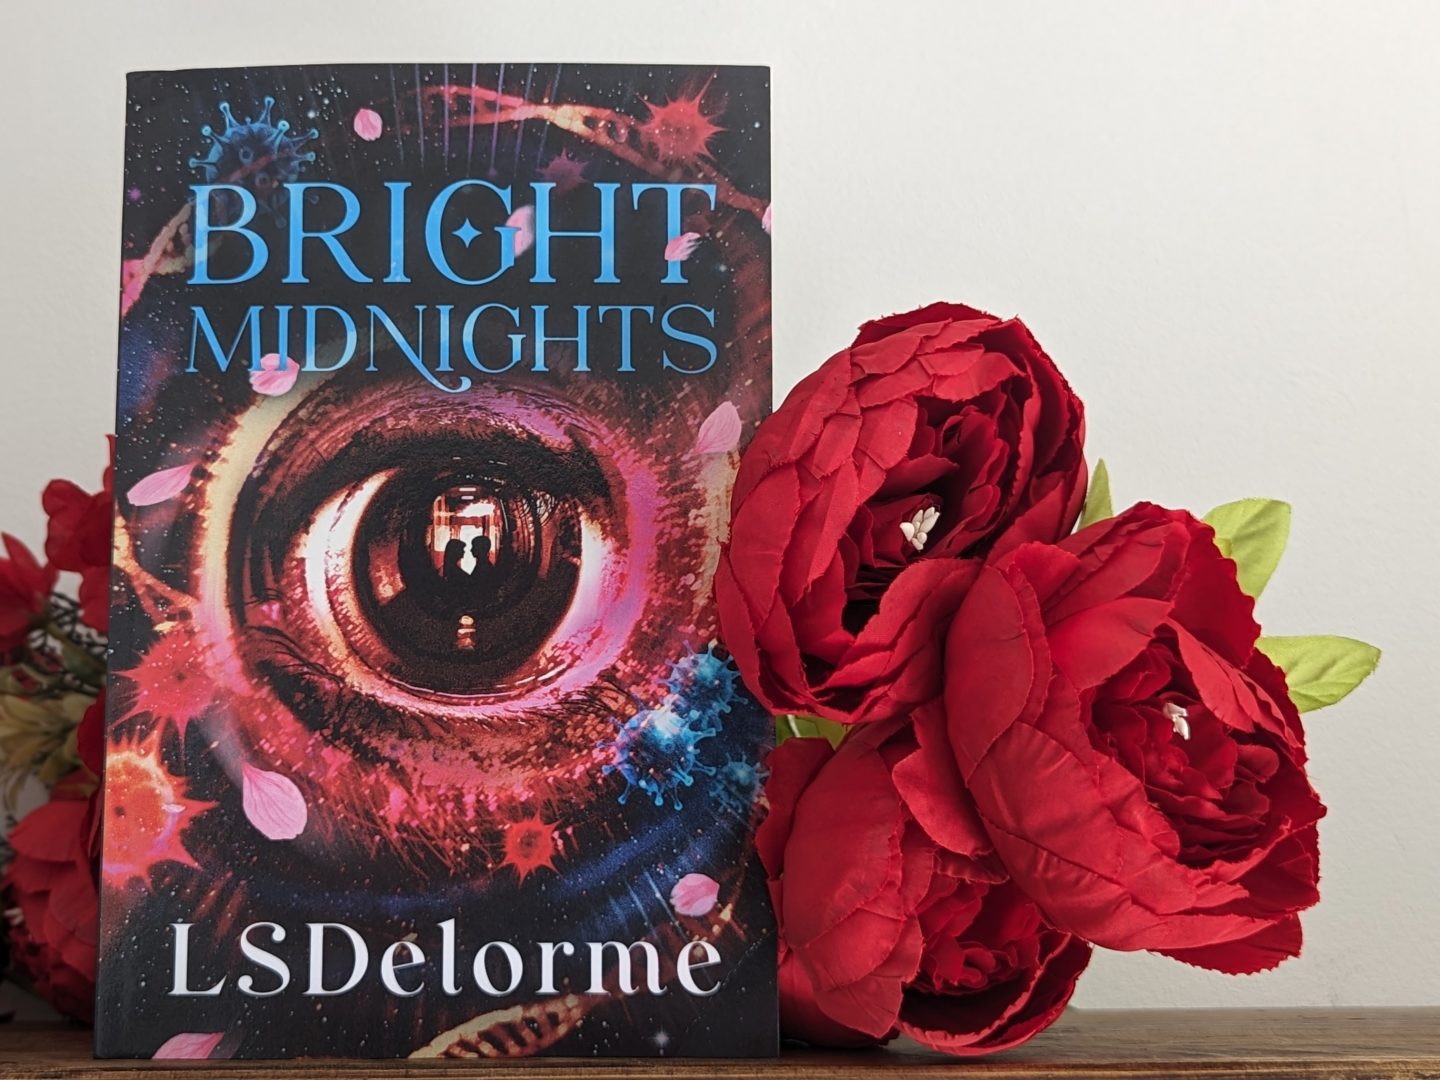 Bright Midnights book with red flowers in front displayed on a wooden shelf